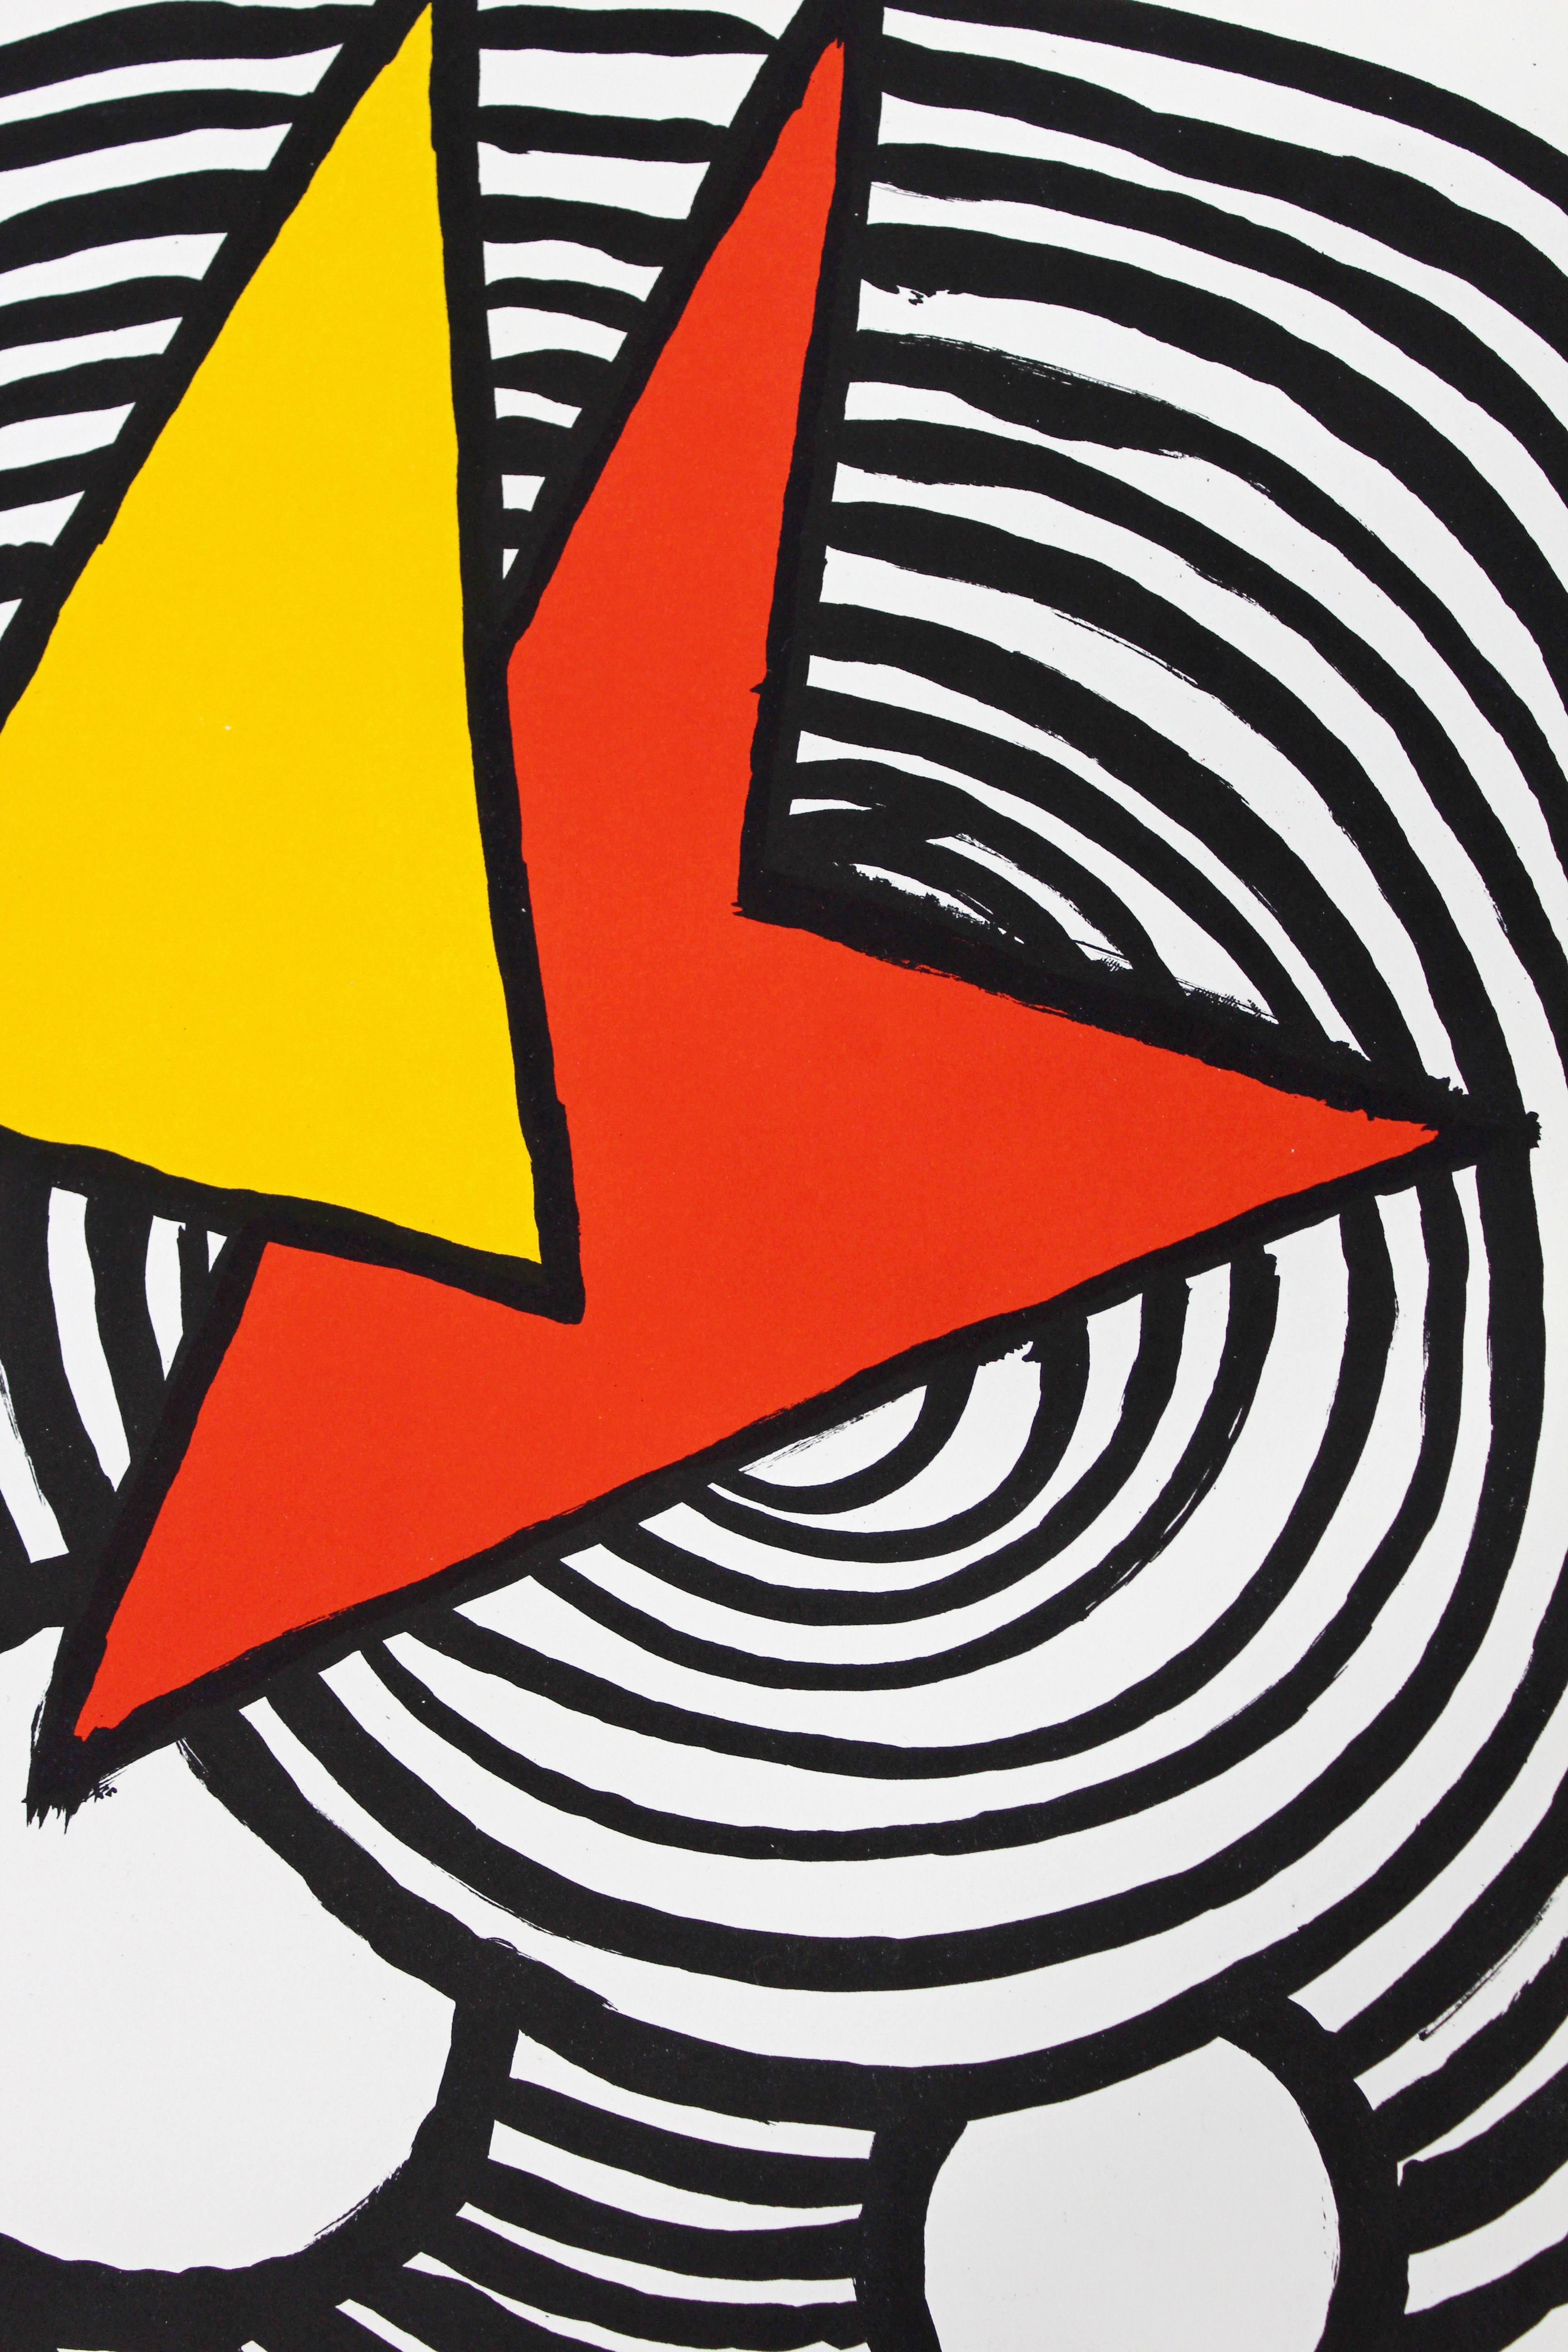 For your consideration is an unframed lithograph from Derriere le Miroir, by Alexander Calder, circa 1963. In excellent condition. The dimensions are 11